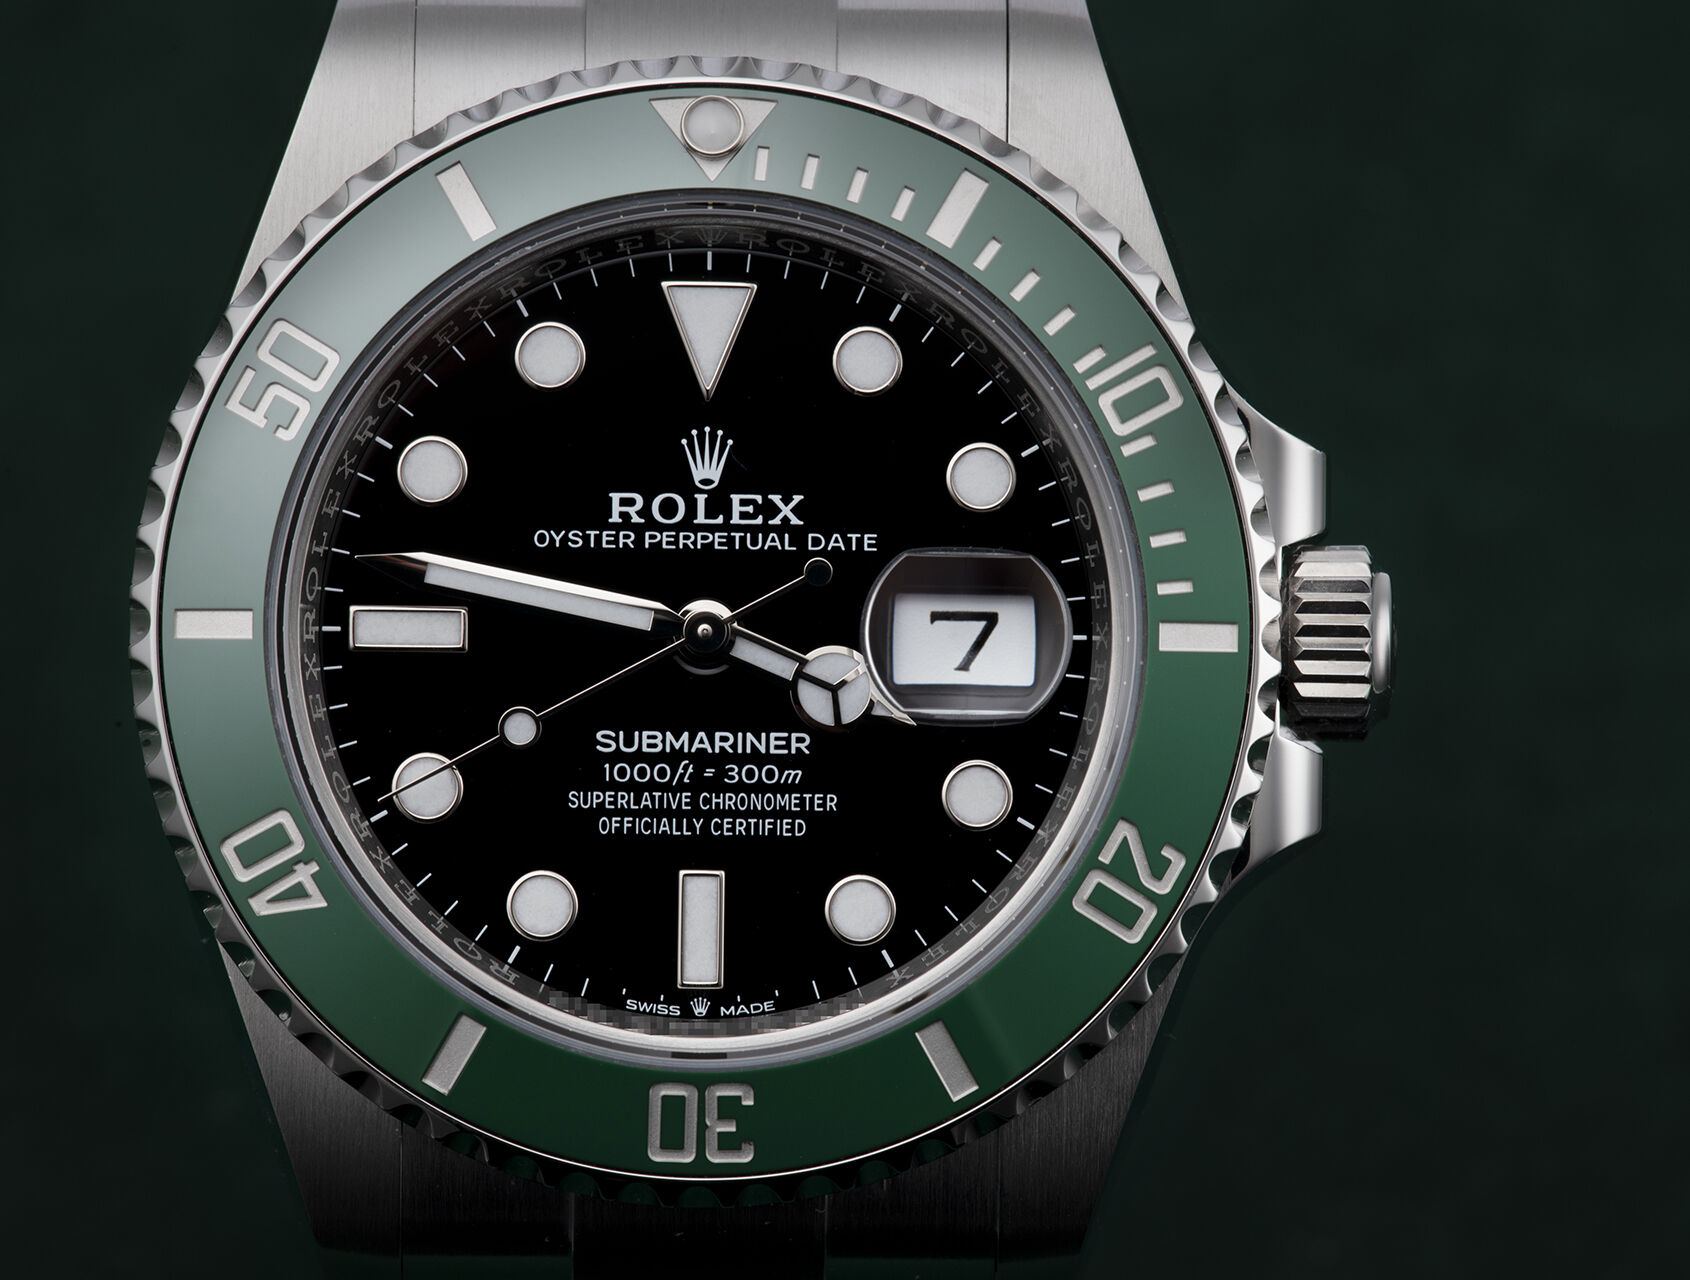 ref 126610LV | 126610LV - Box & Papers | Rolex Submariner Date